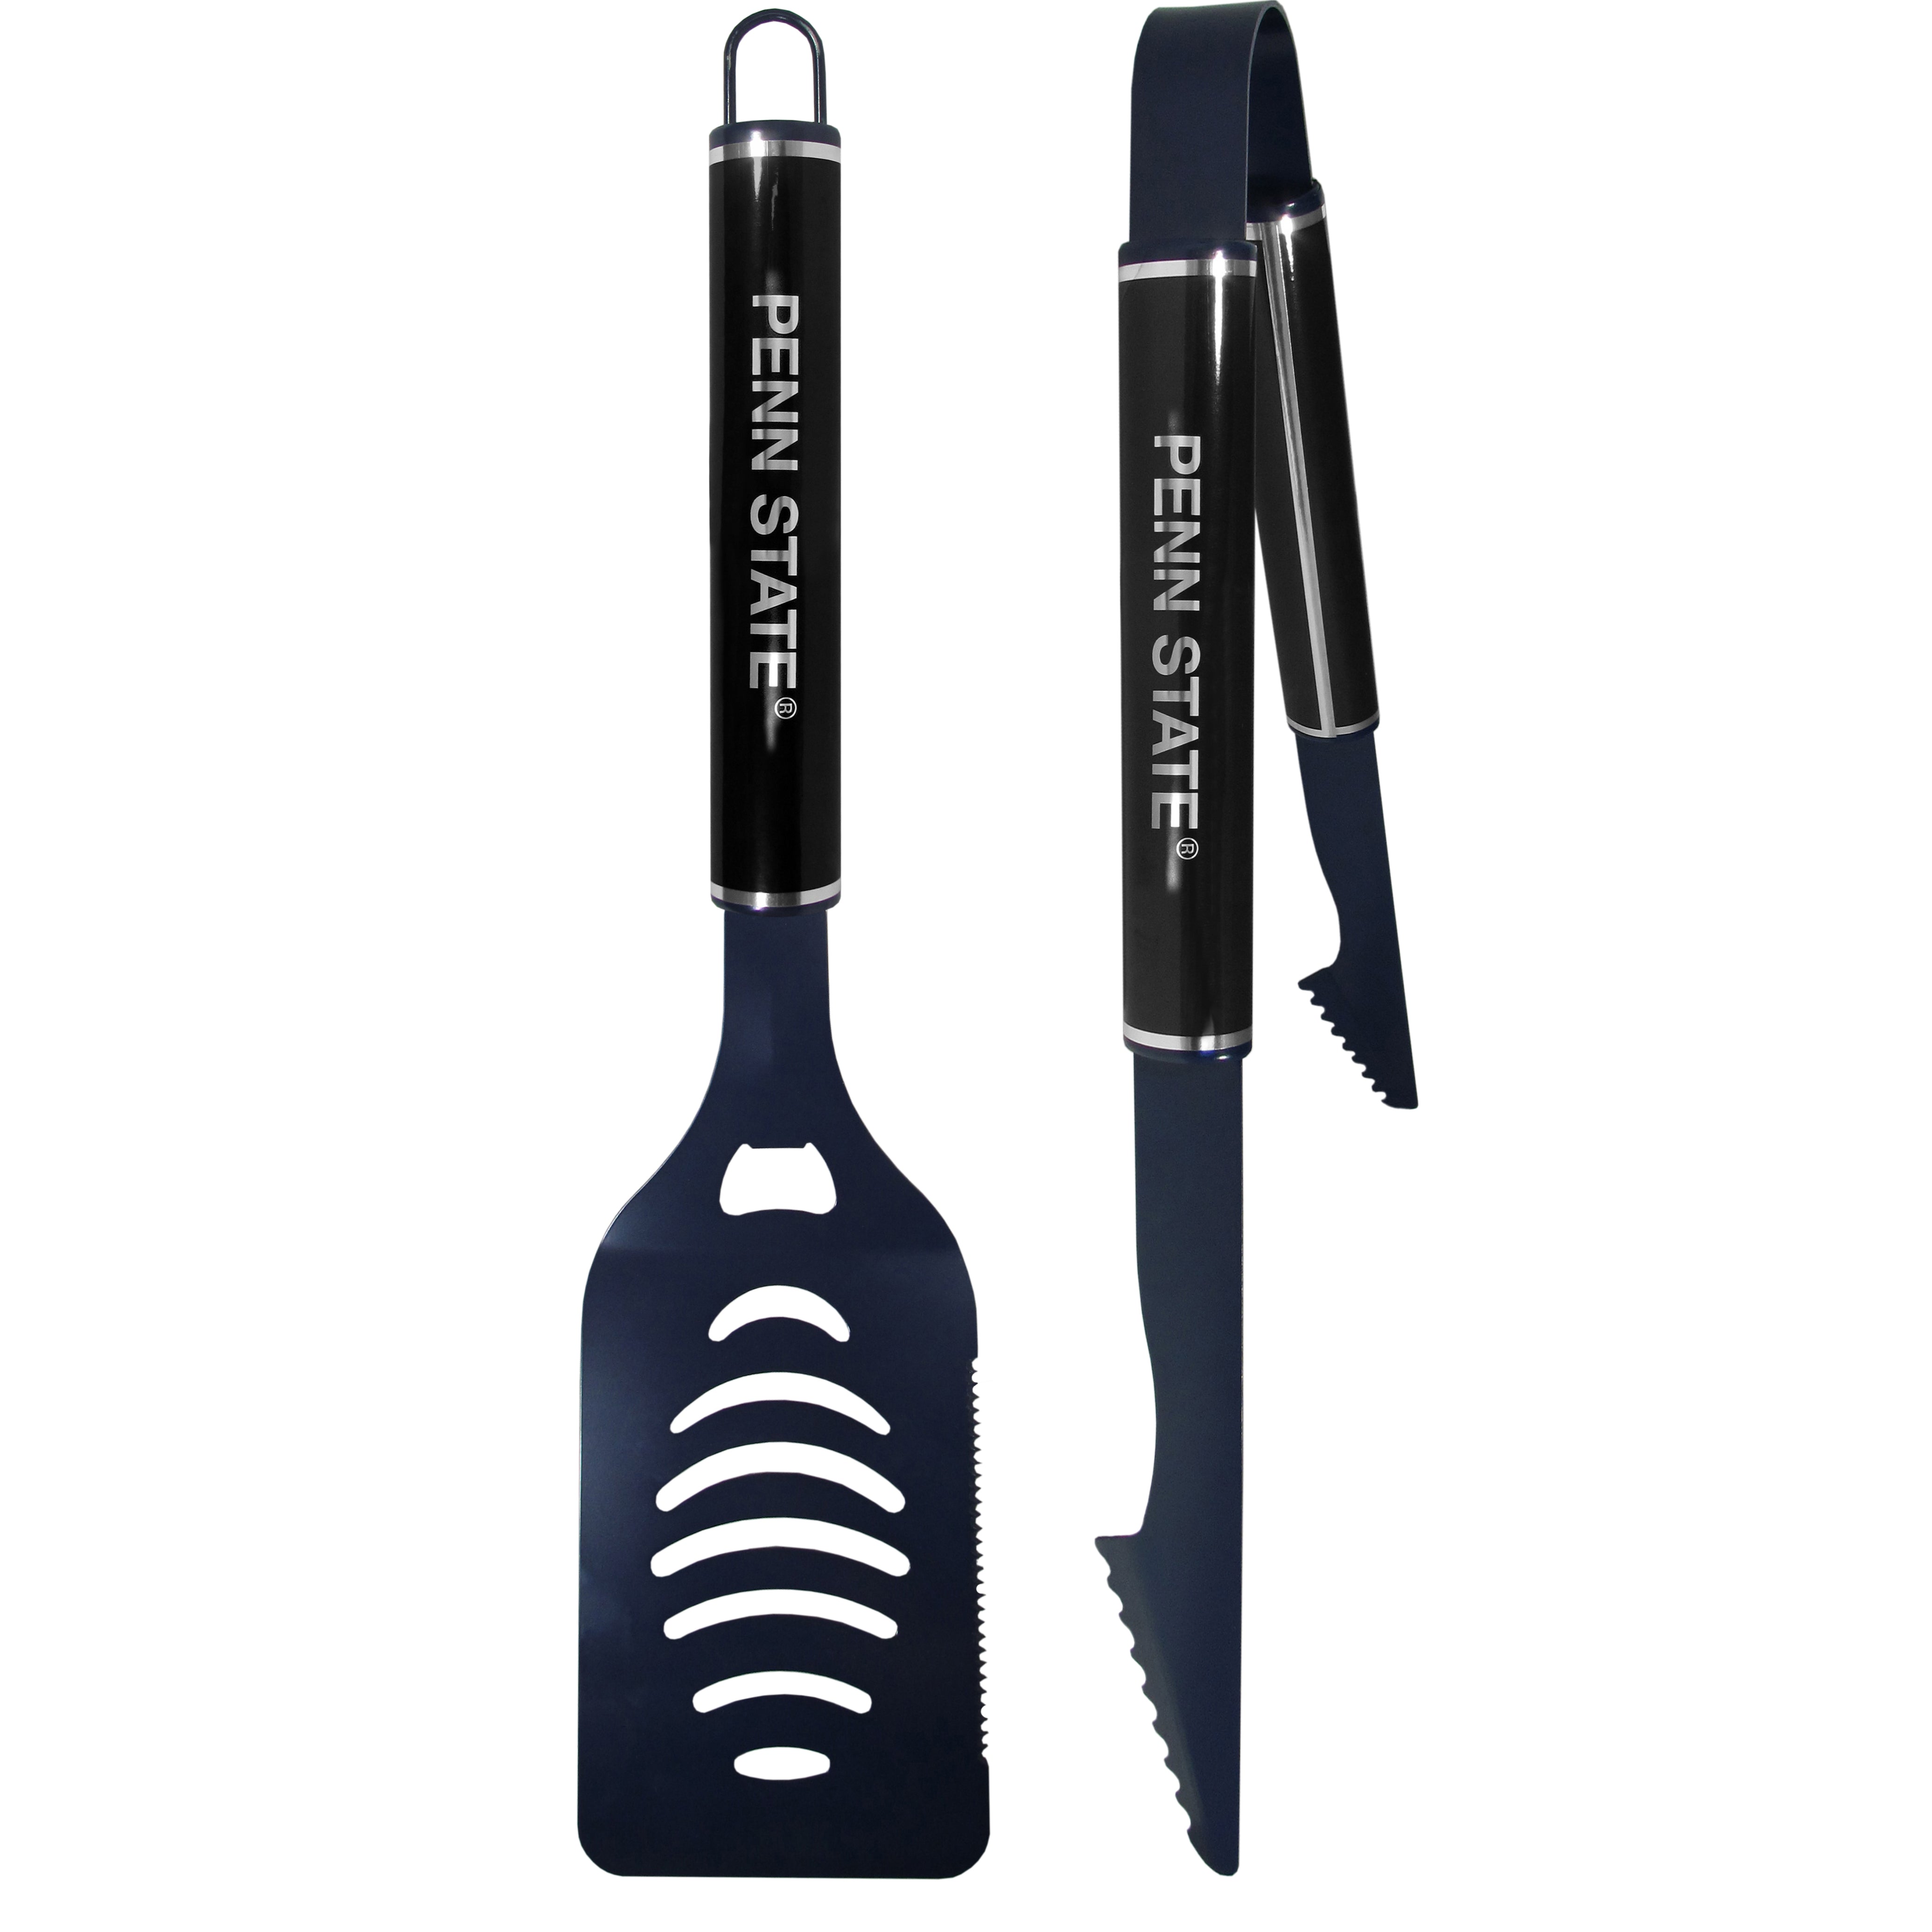 Penn St. Nittany Lions 2 pc Color and Black Tailgate BBQ Set